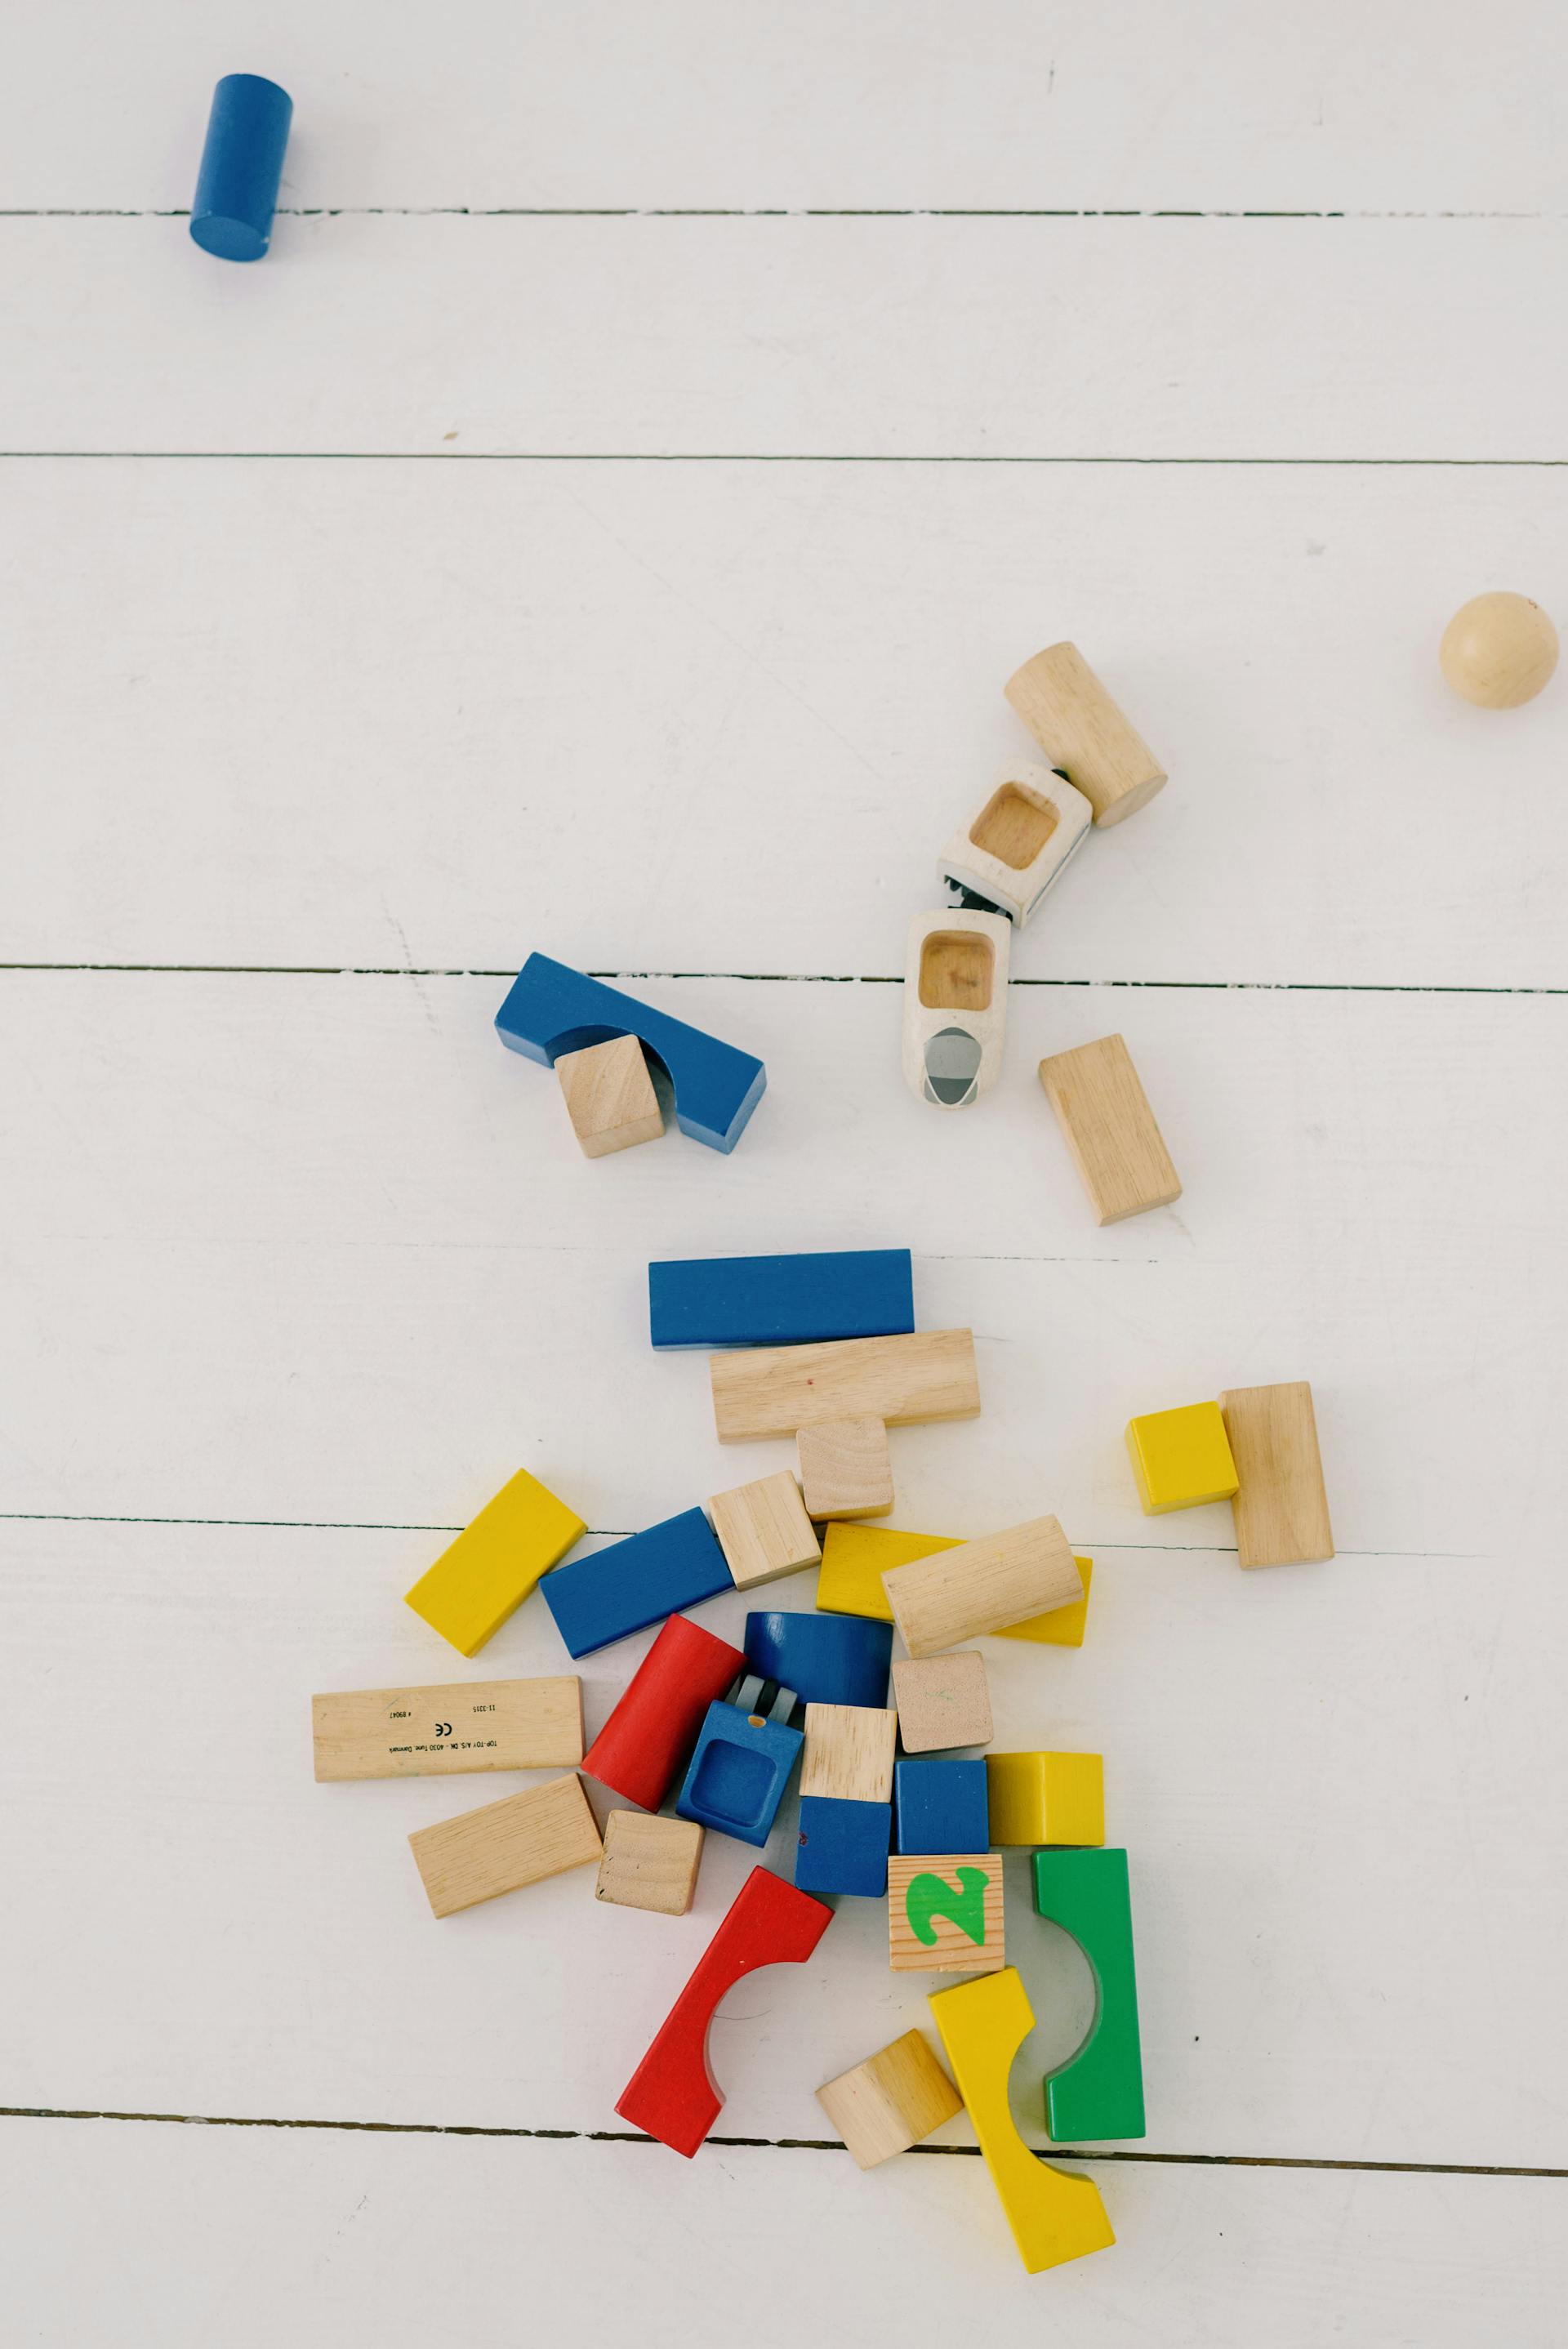 Toys scattered on the floor | Source: Pexels